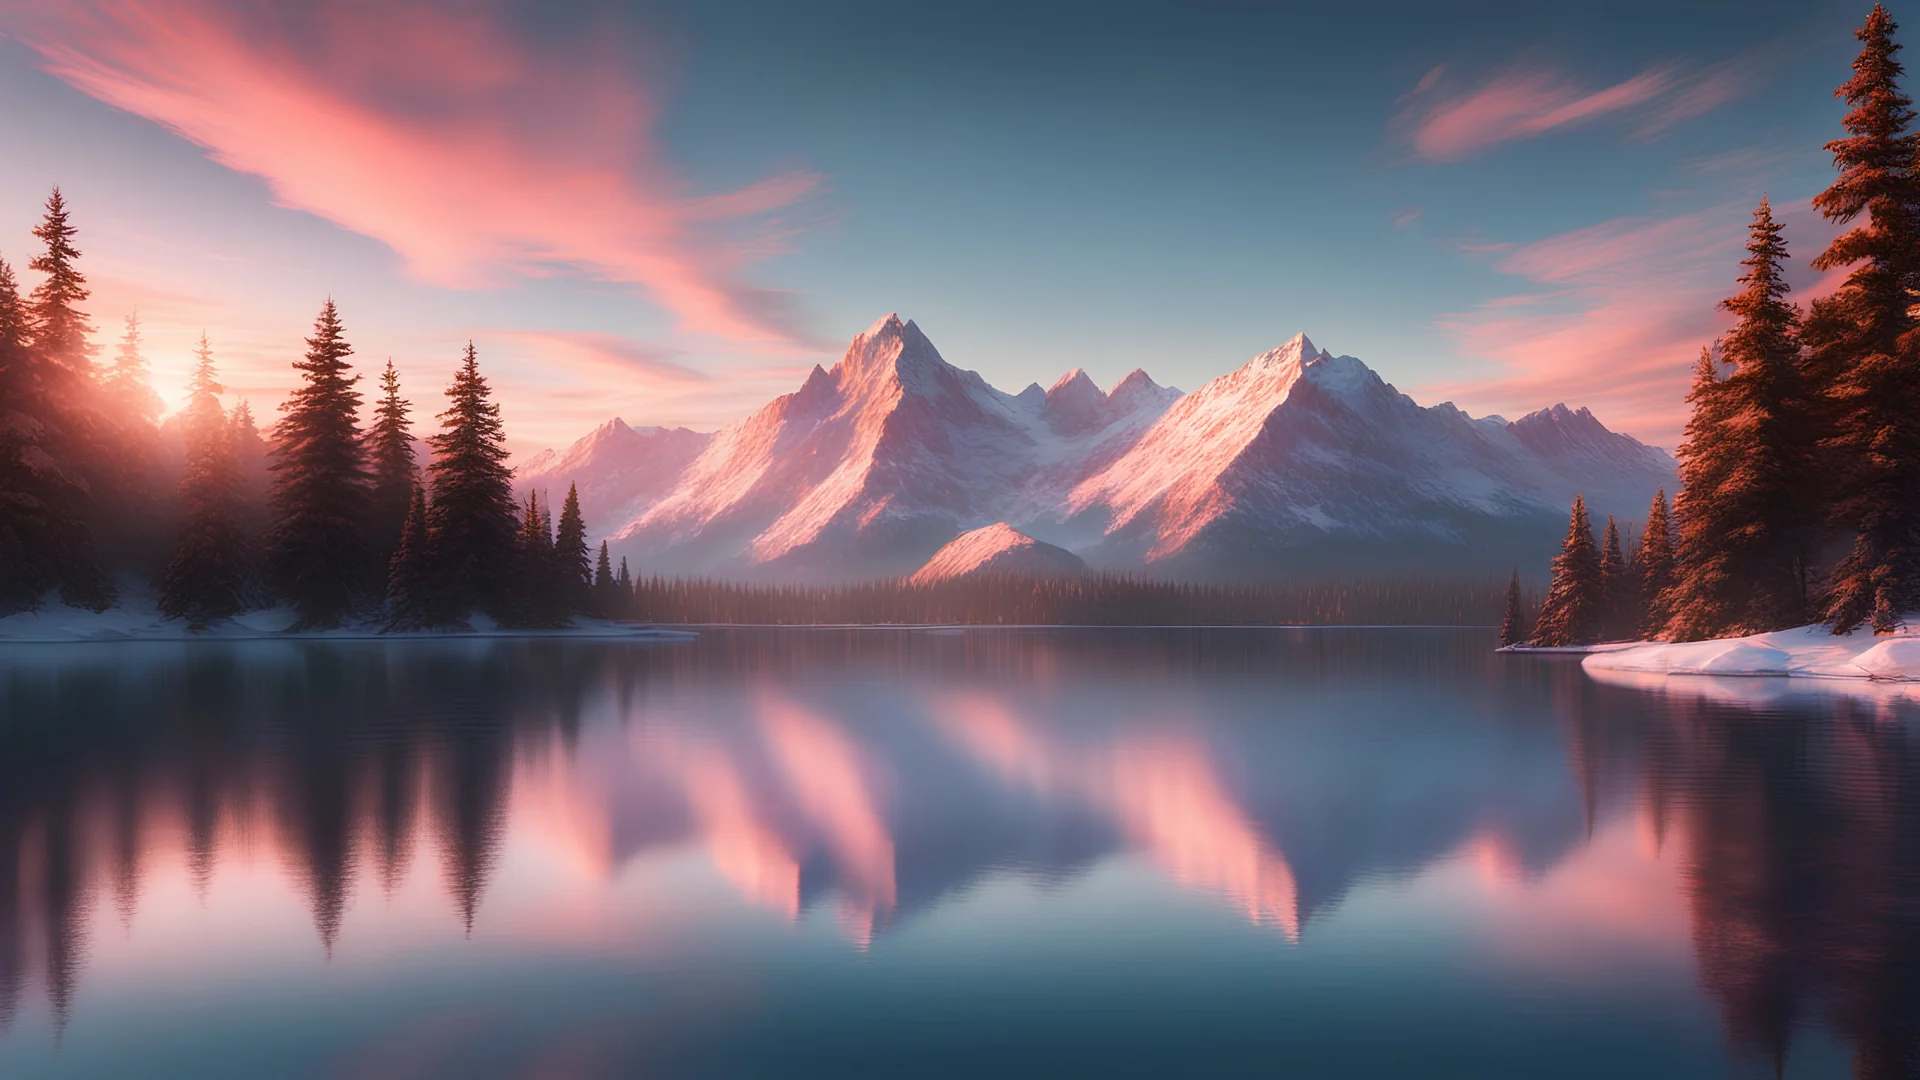 Render a serene panoramic view of majestic, snow-capped peaks rising above a tranquil alpine lake at sunset. Use bold yet muted tones - deep teal waters reflecting the muted pinks and oranges of wispy clouds streaking an azure sky. In the foreground, silhouette a stand of evergreen trees against the twilight colors. Capture the awe-inspiring grandeur and stillness of an unspoiled wilderness through careful lighting, subtle textures, and balanced composition.